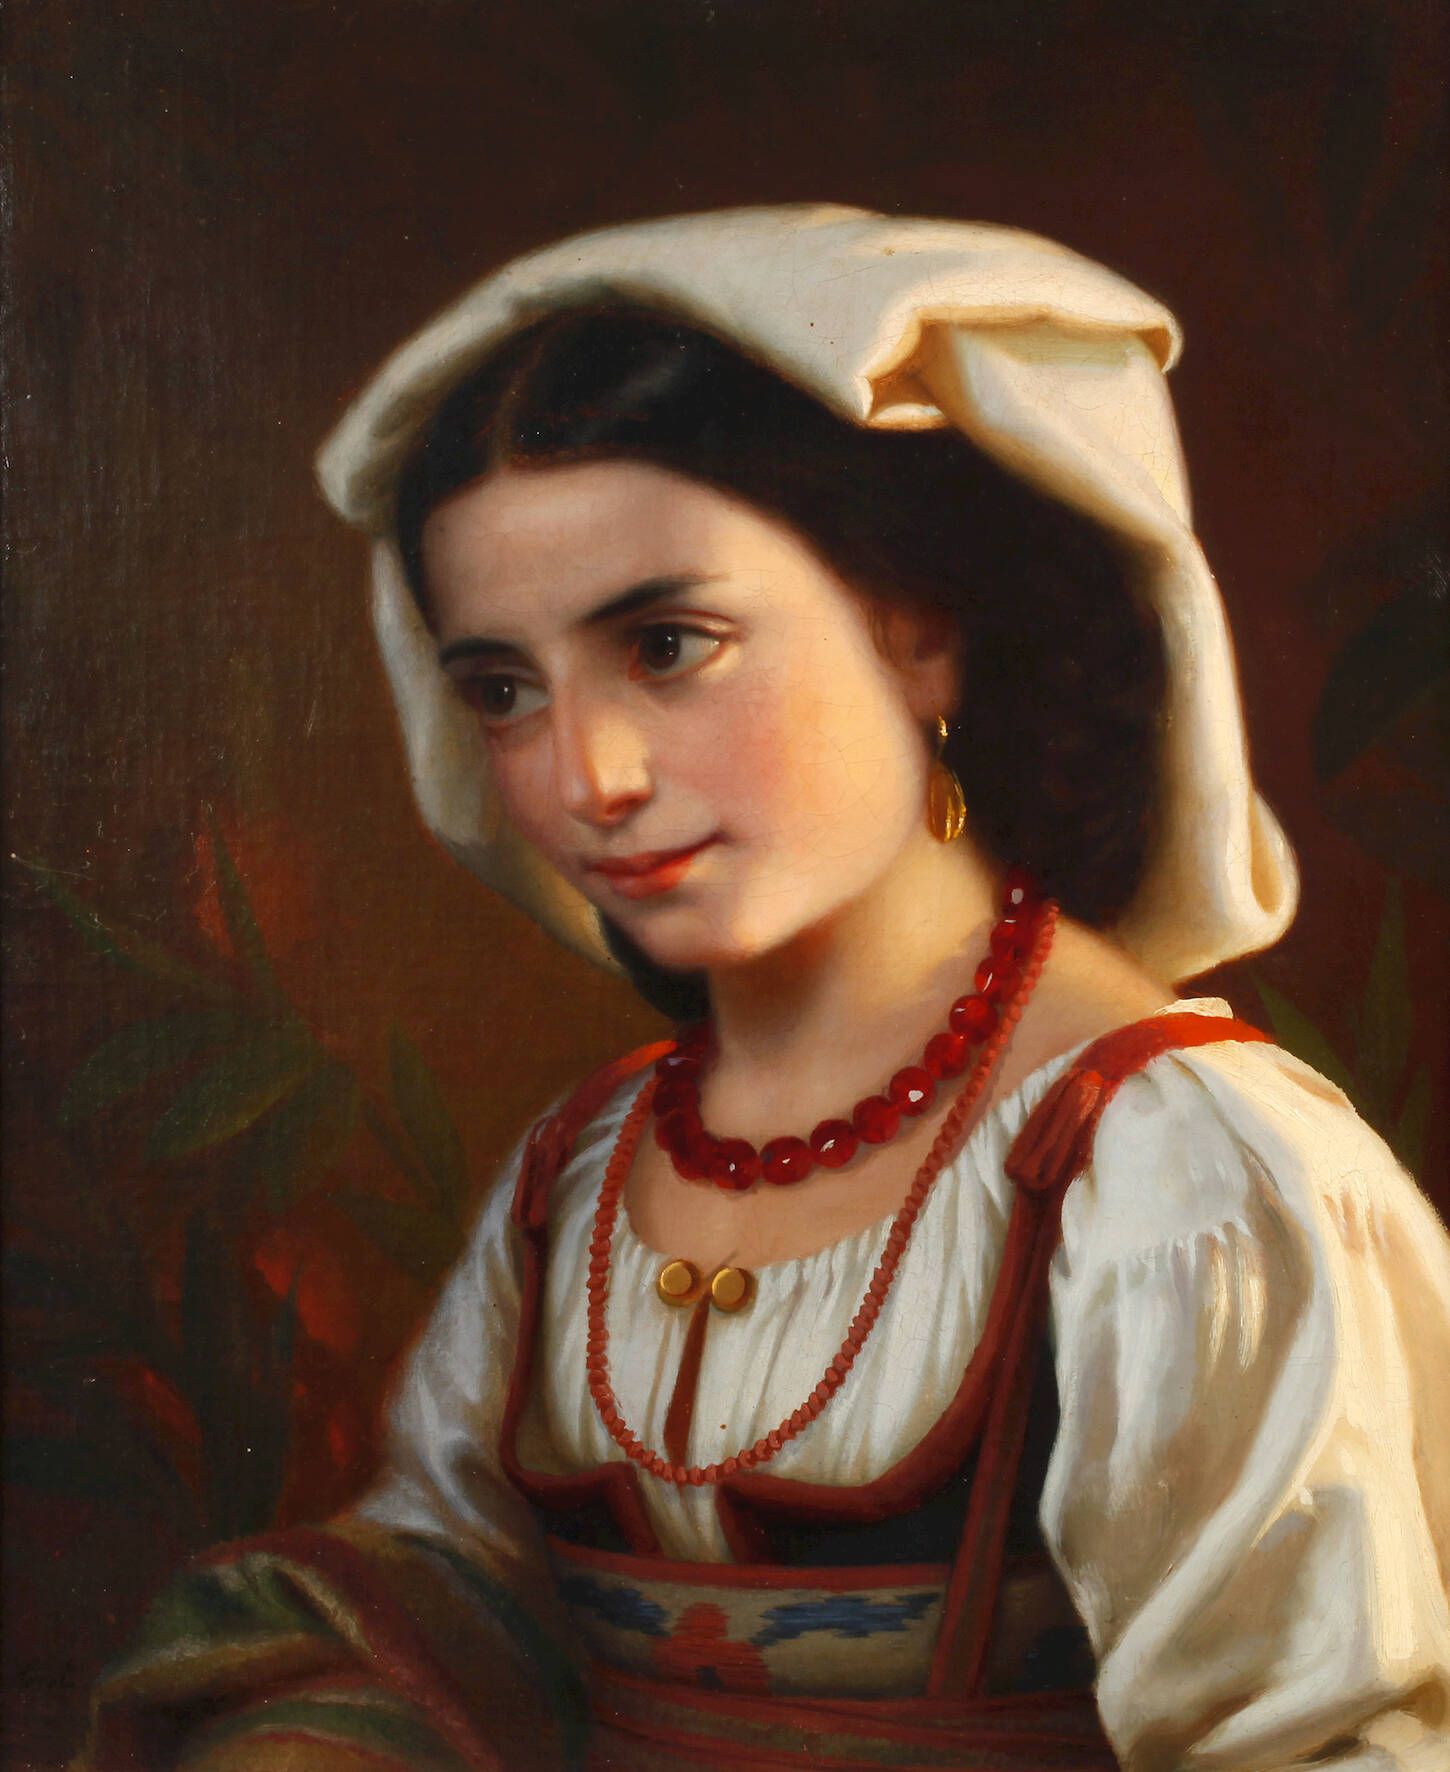 Ludwig Horst, Mädchen in Tracht